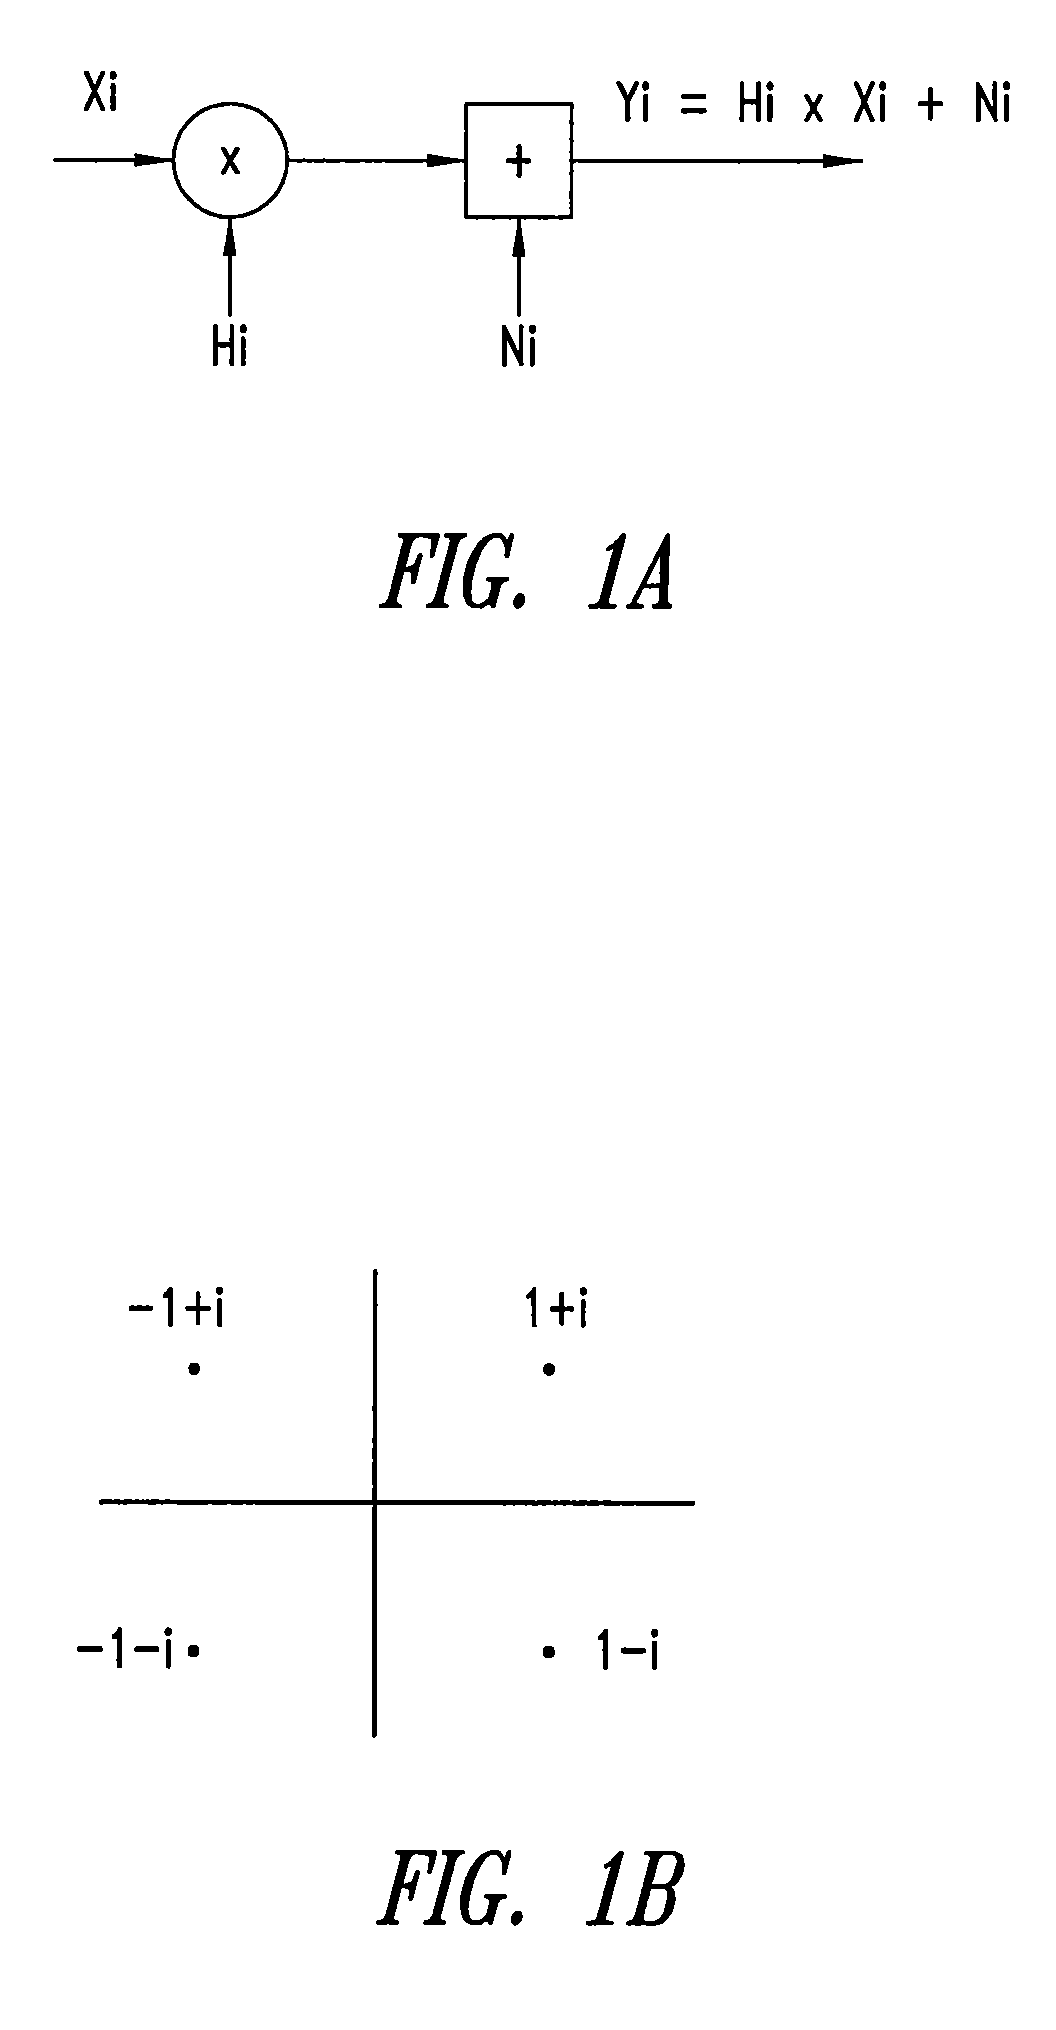 Process for modulation and determination of the bit loading on a transmission channel